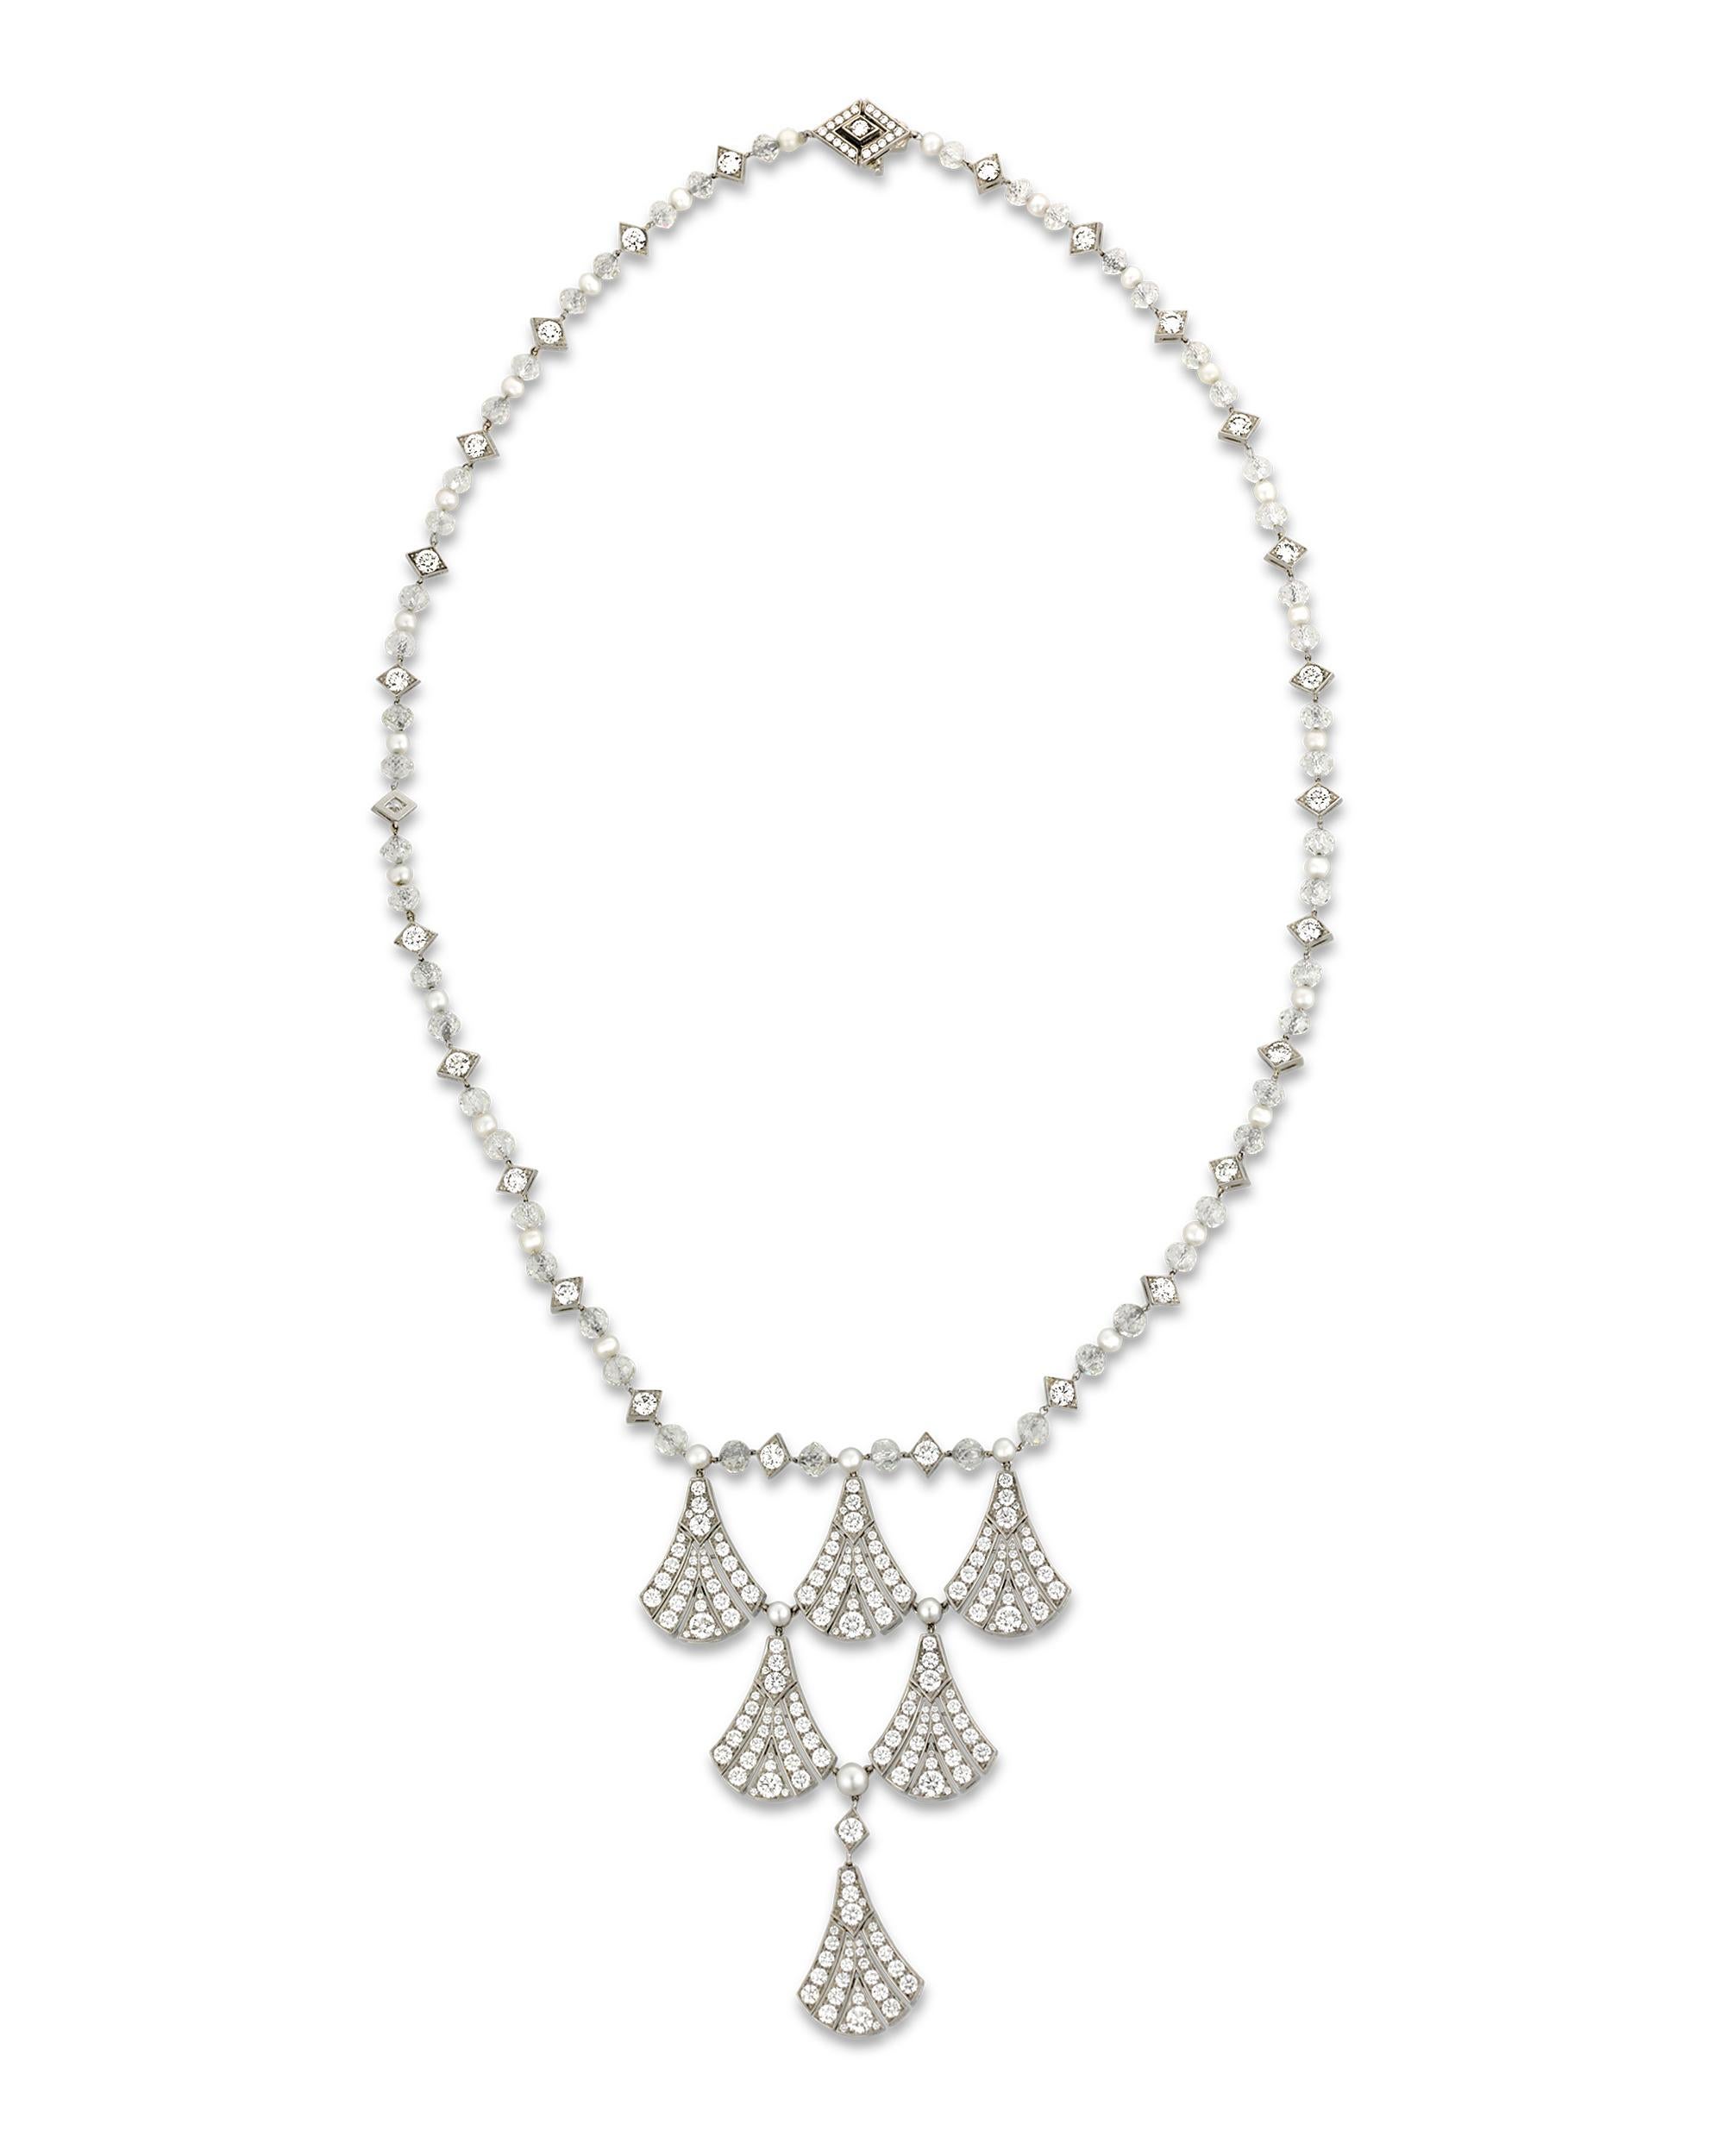 Six diamond-encrusted fans are suspended from a pearl and diamond bead chain in this elegant lavalier necklace from Tiffany & Co. Round diamonds totaling 11.59 carats make up the fan shapes while faceted diamond beads and round diamonds totaling